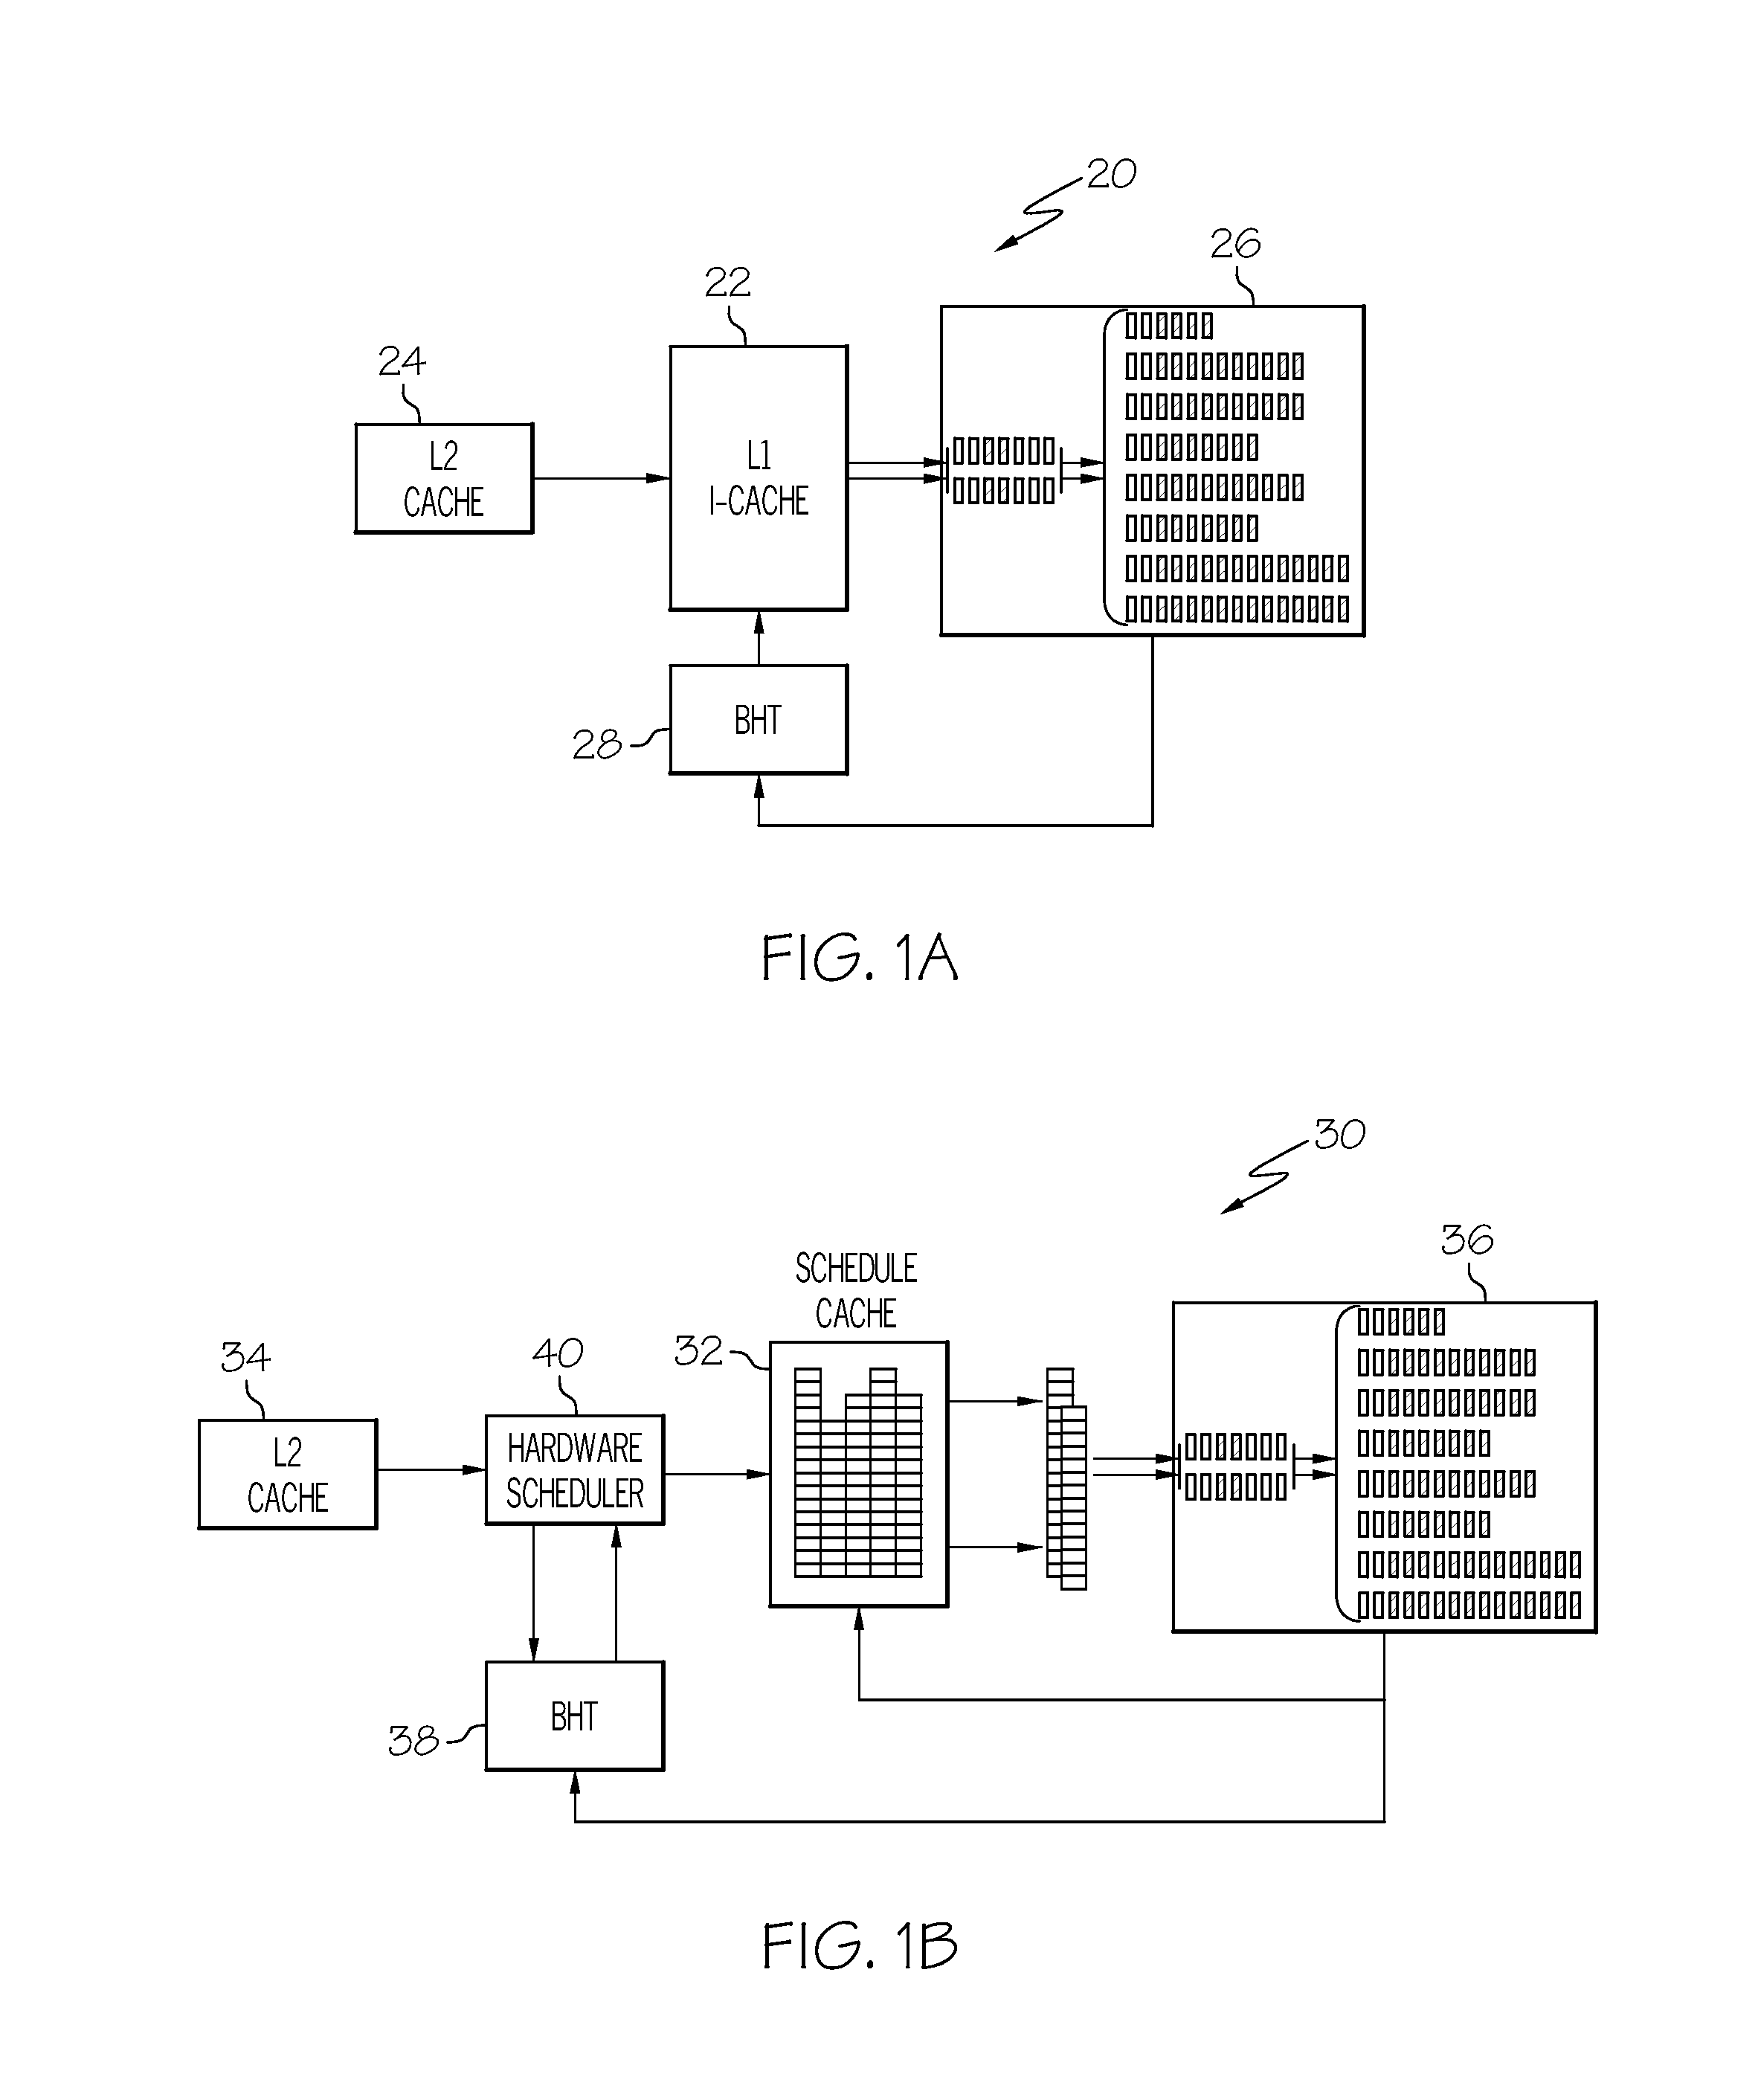 Computer processing system employing an instruction schedule cache